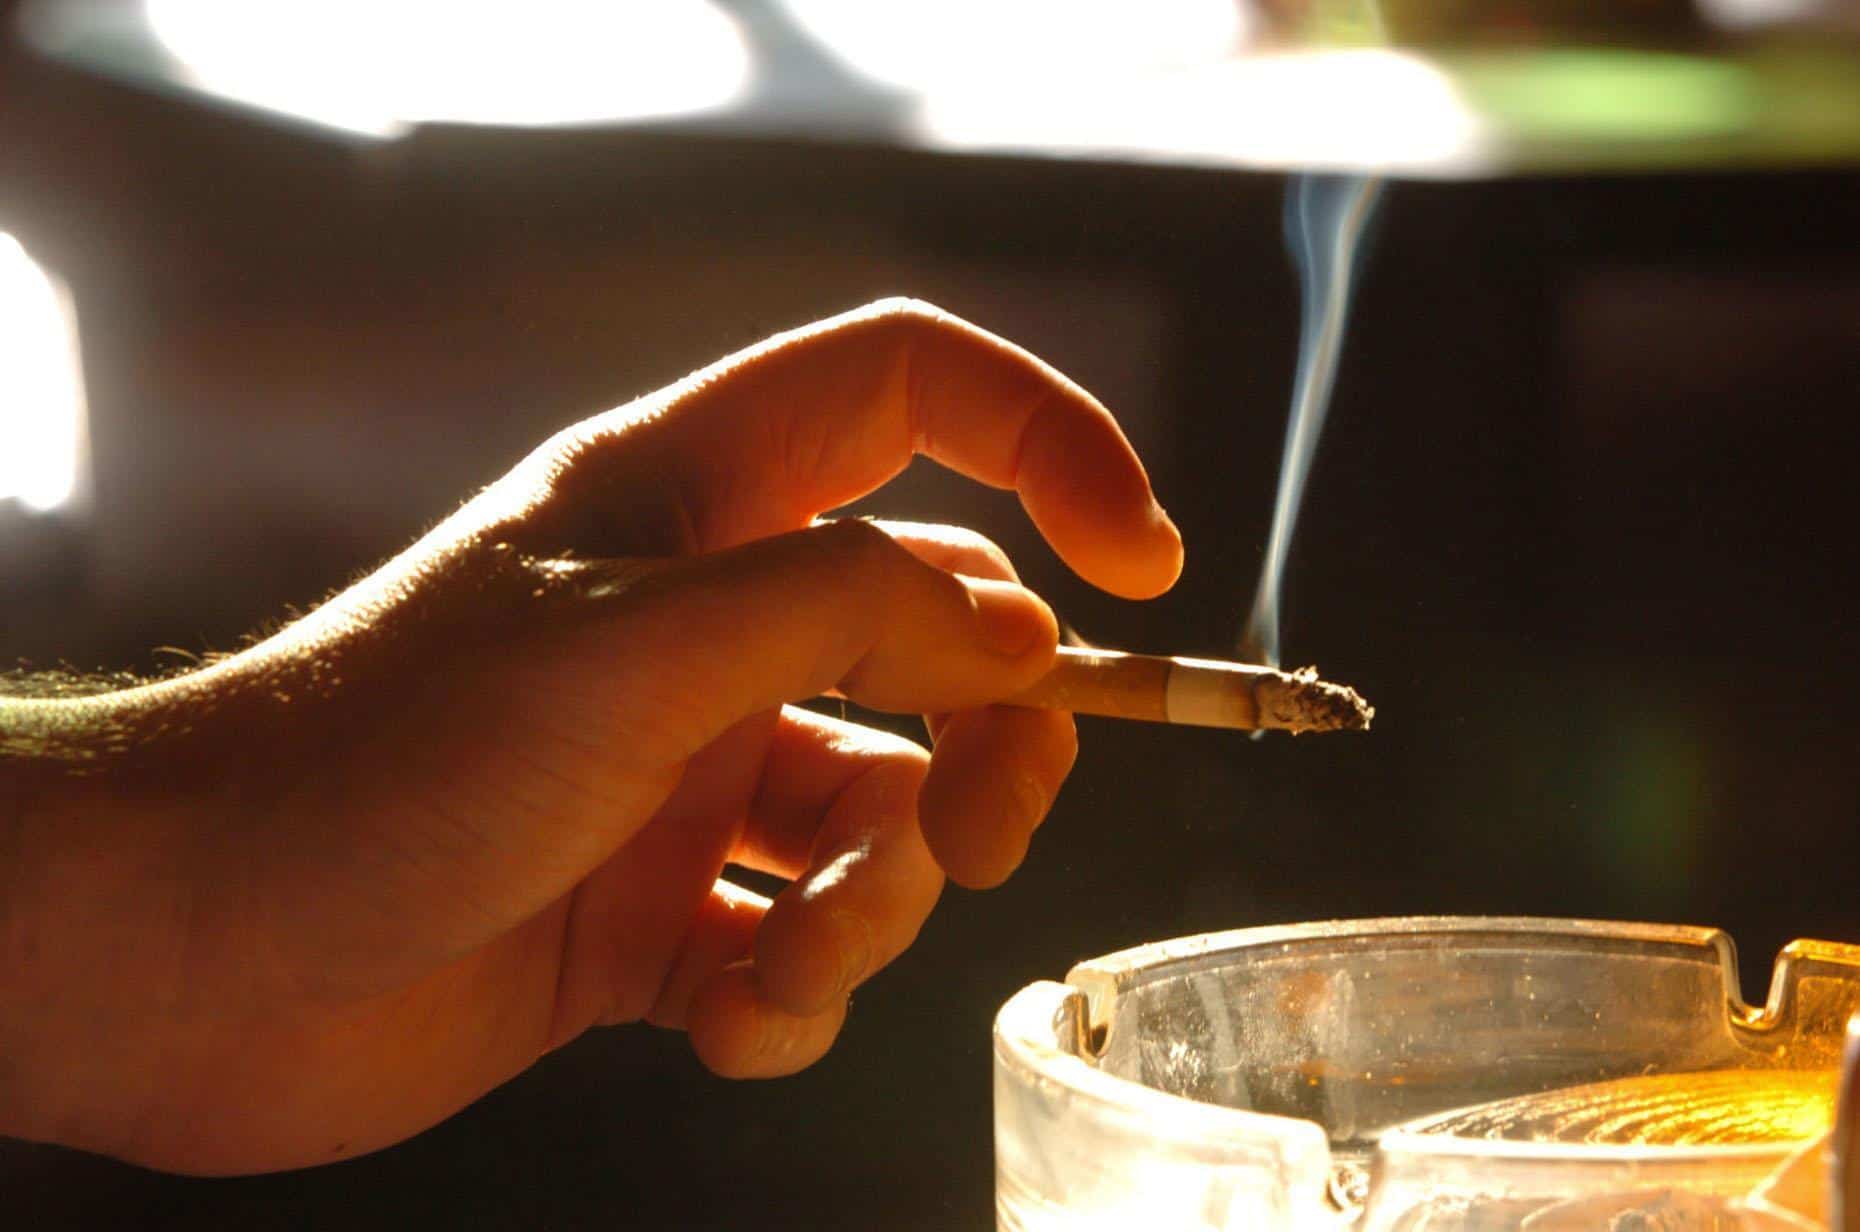 Researchers call on governments to raise legal smoking age to 22